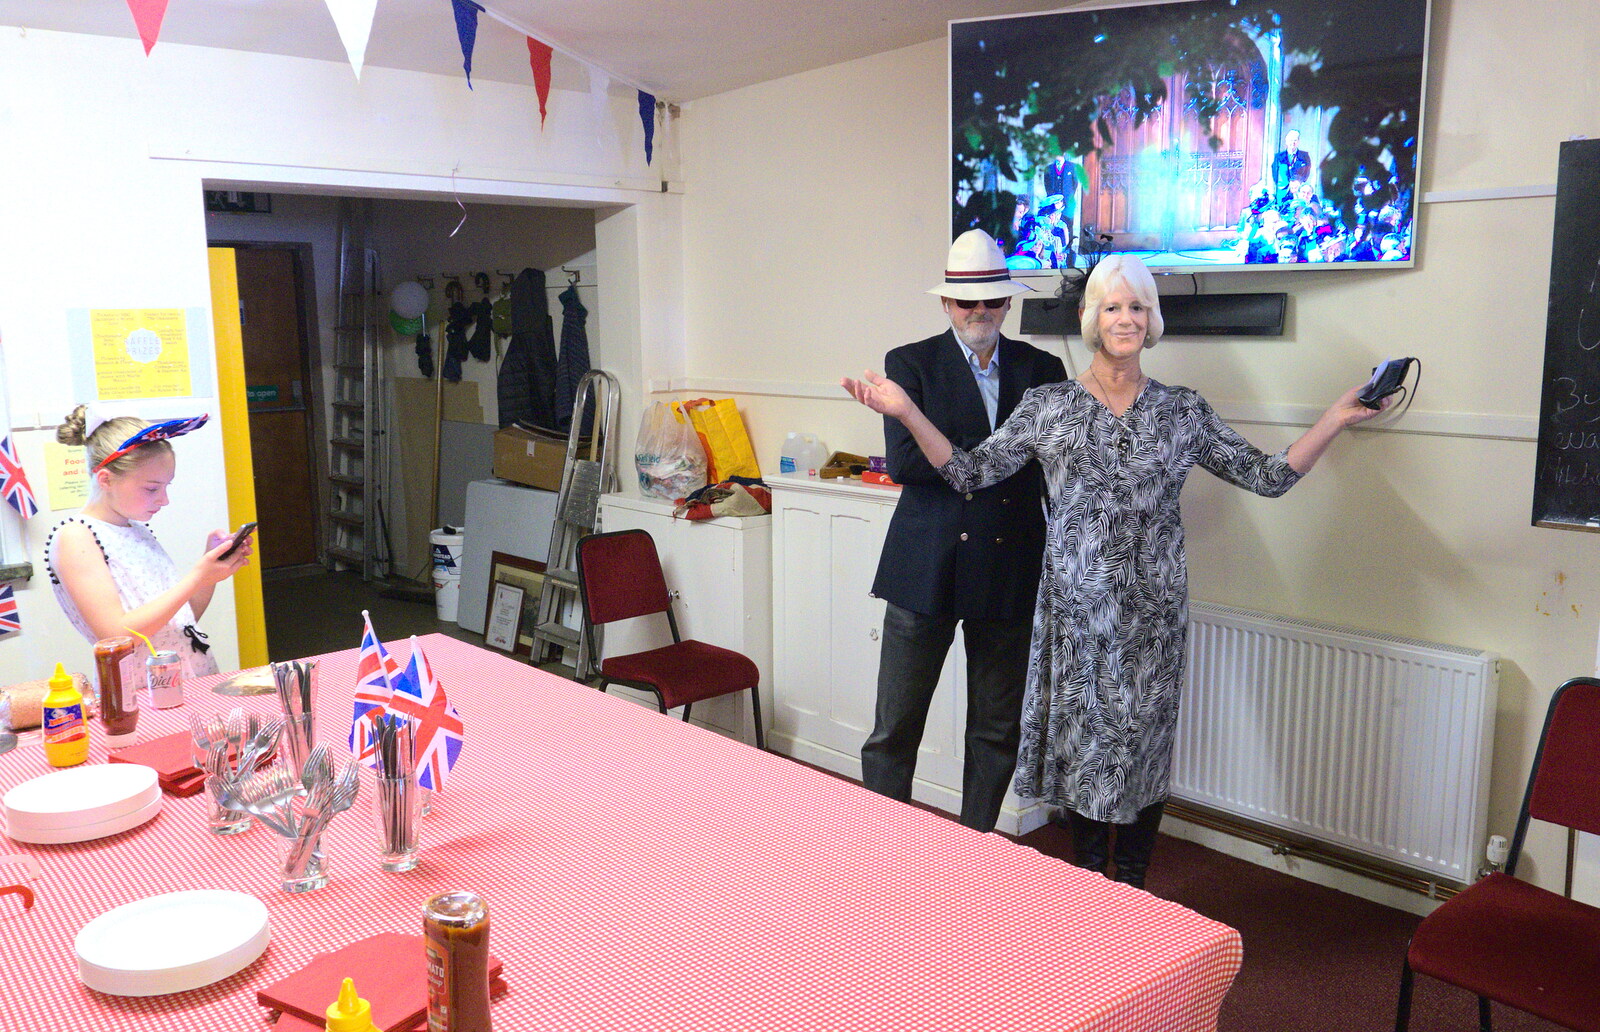 The new Village Hall TV is officially unveiled from A Right Royal Wedding at the Village Hall, Brome, Suffolk - 19th May 2018